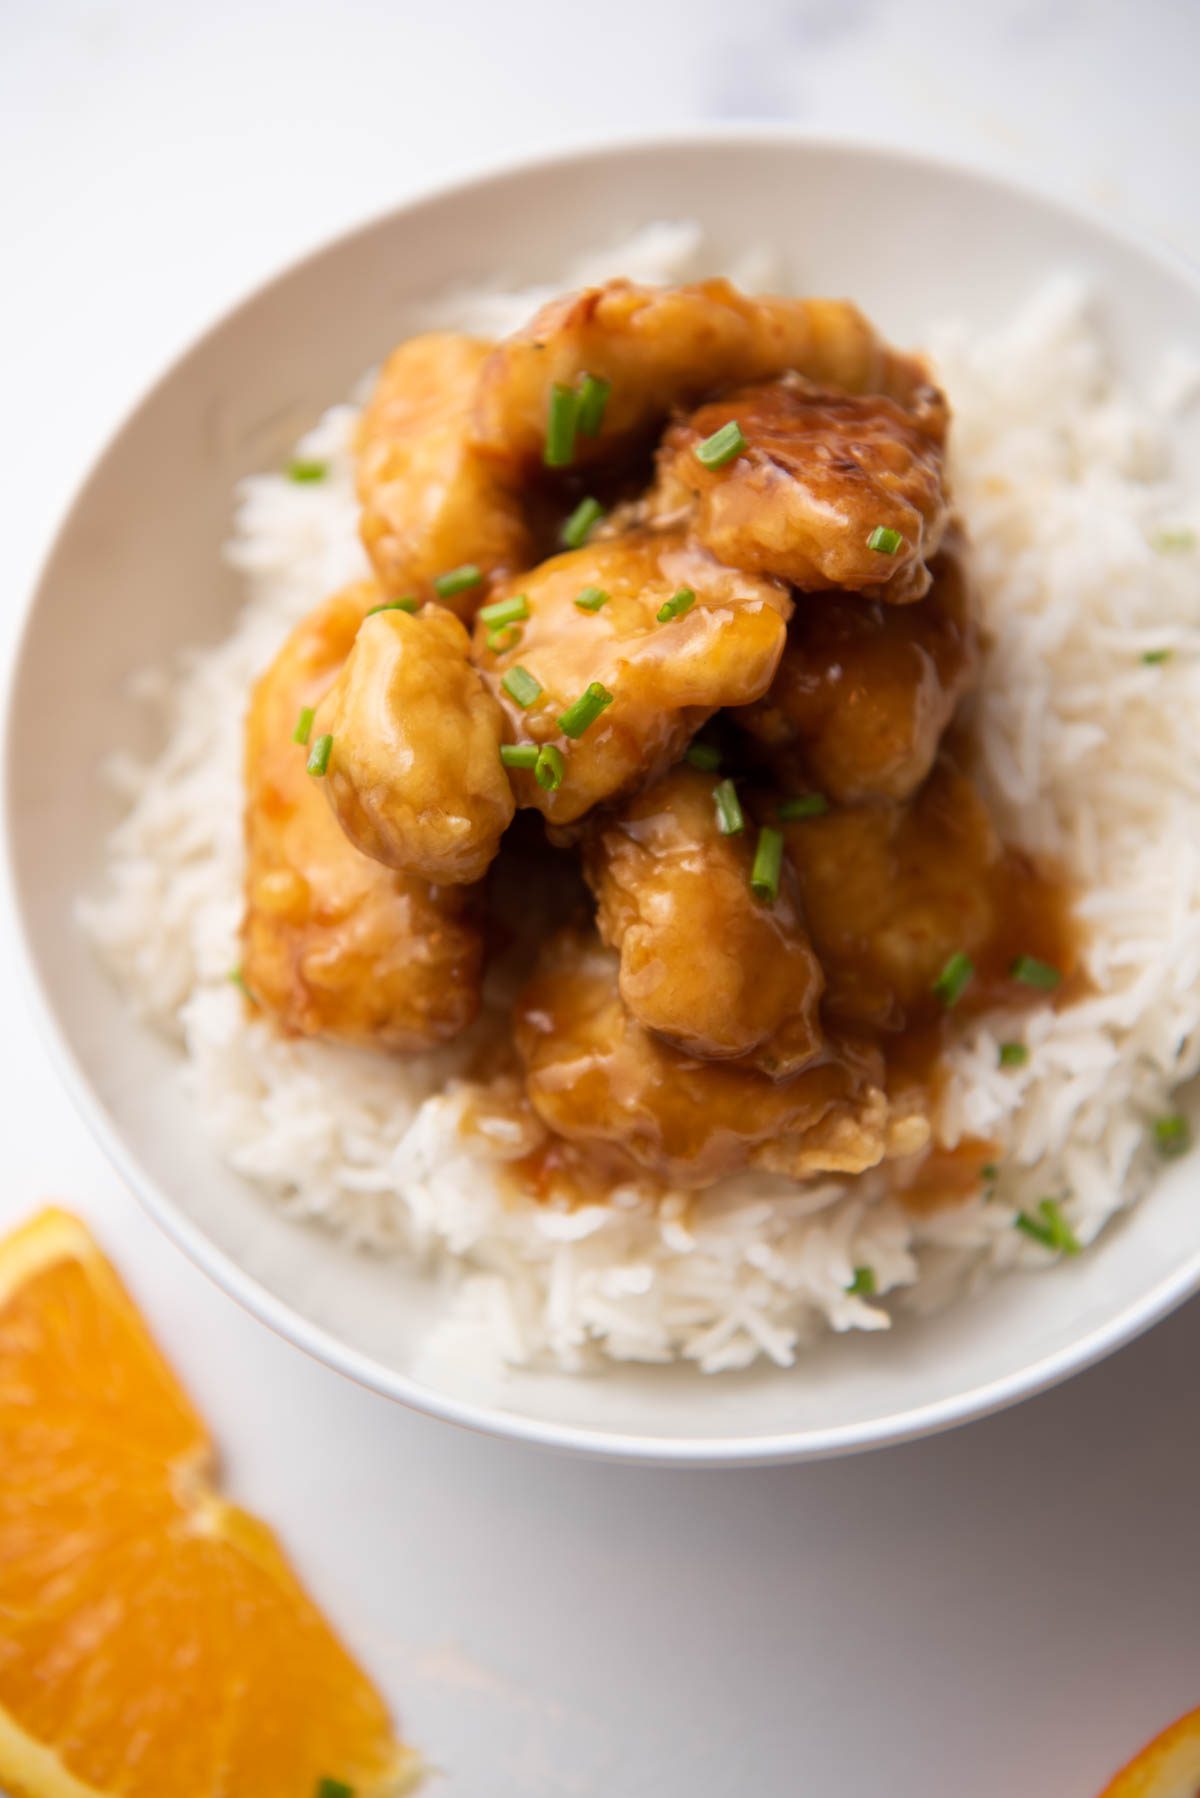 Orange chicken served over rice, garnished with chives.